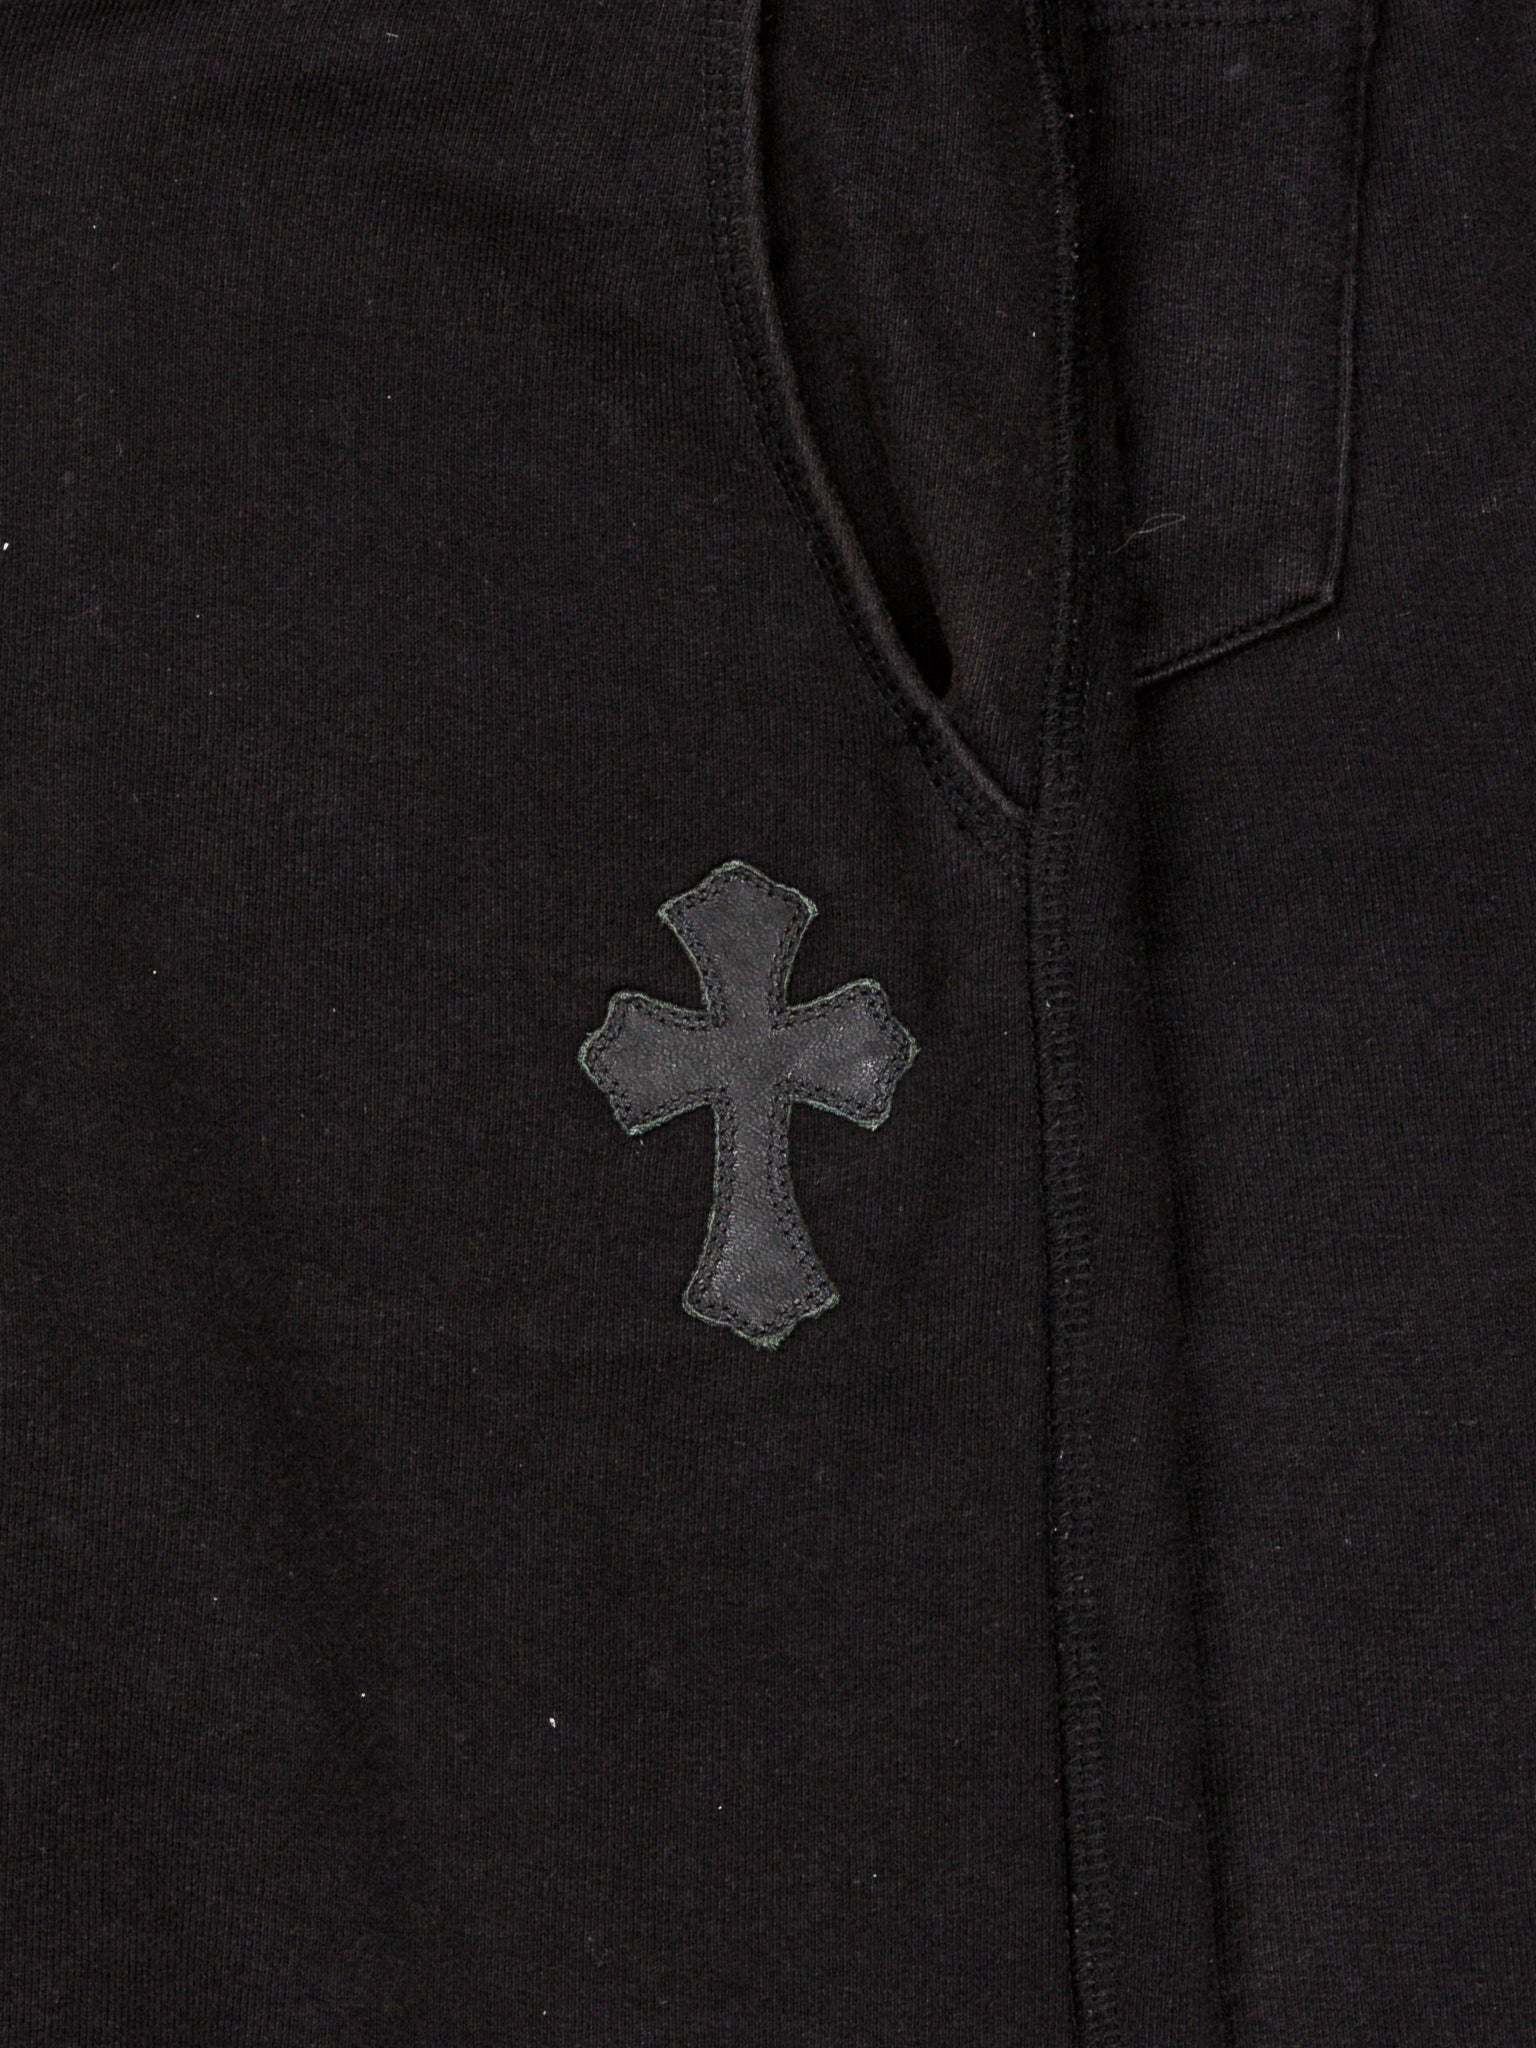 Legit check on chrome hearts cross patch zip up hoodie : r